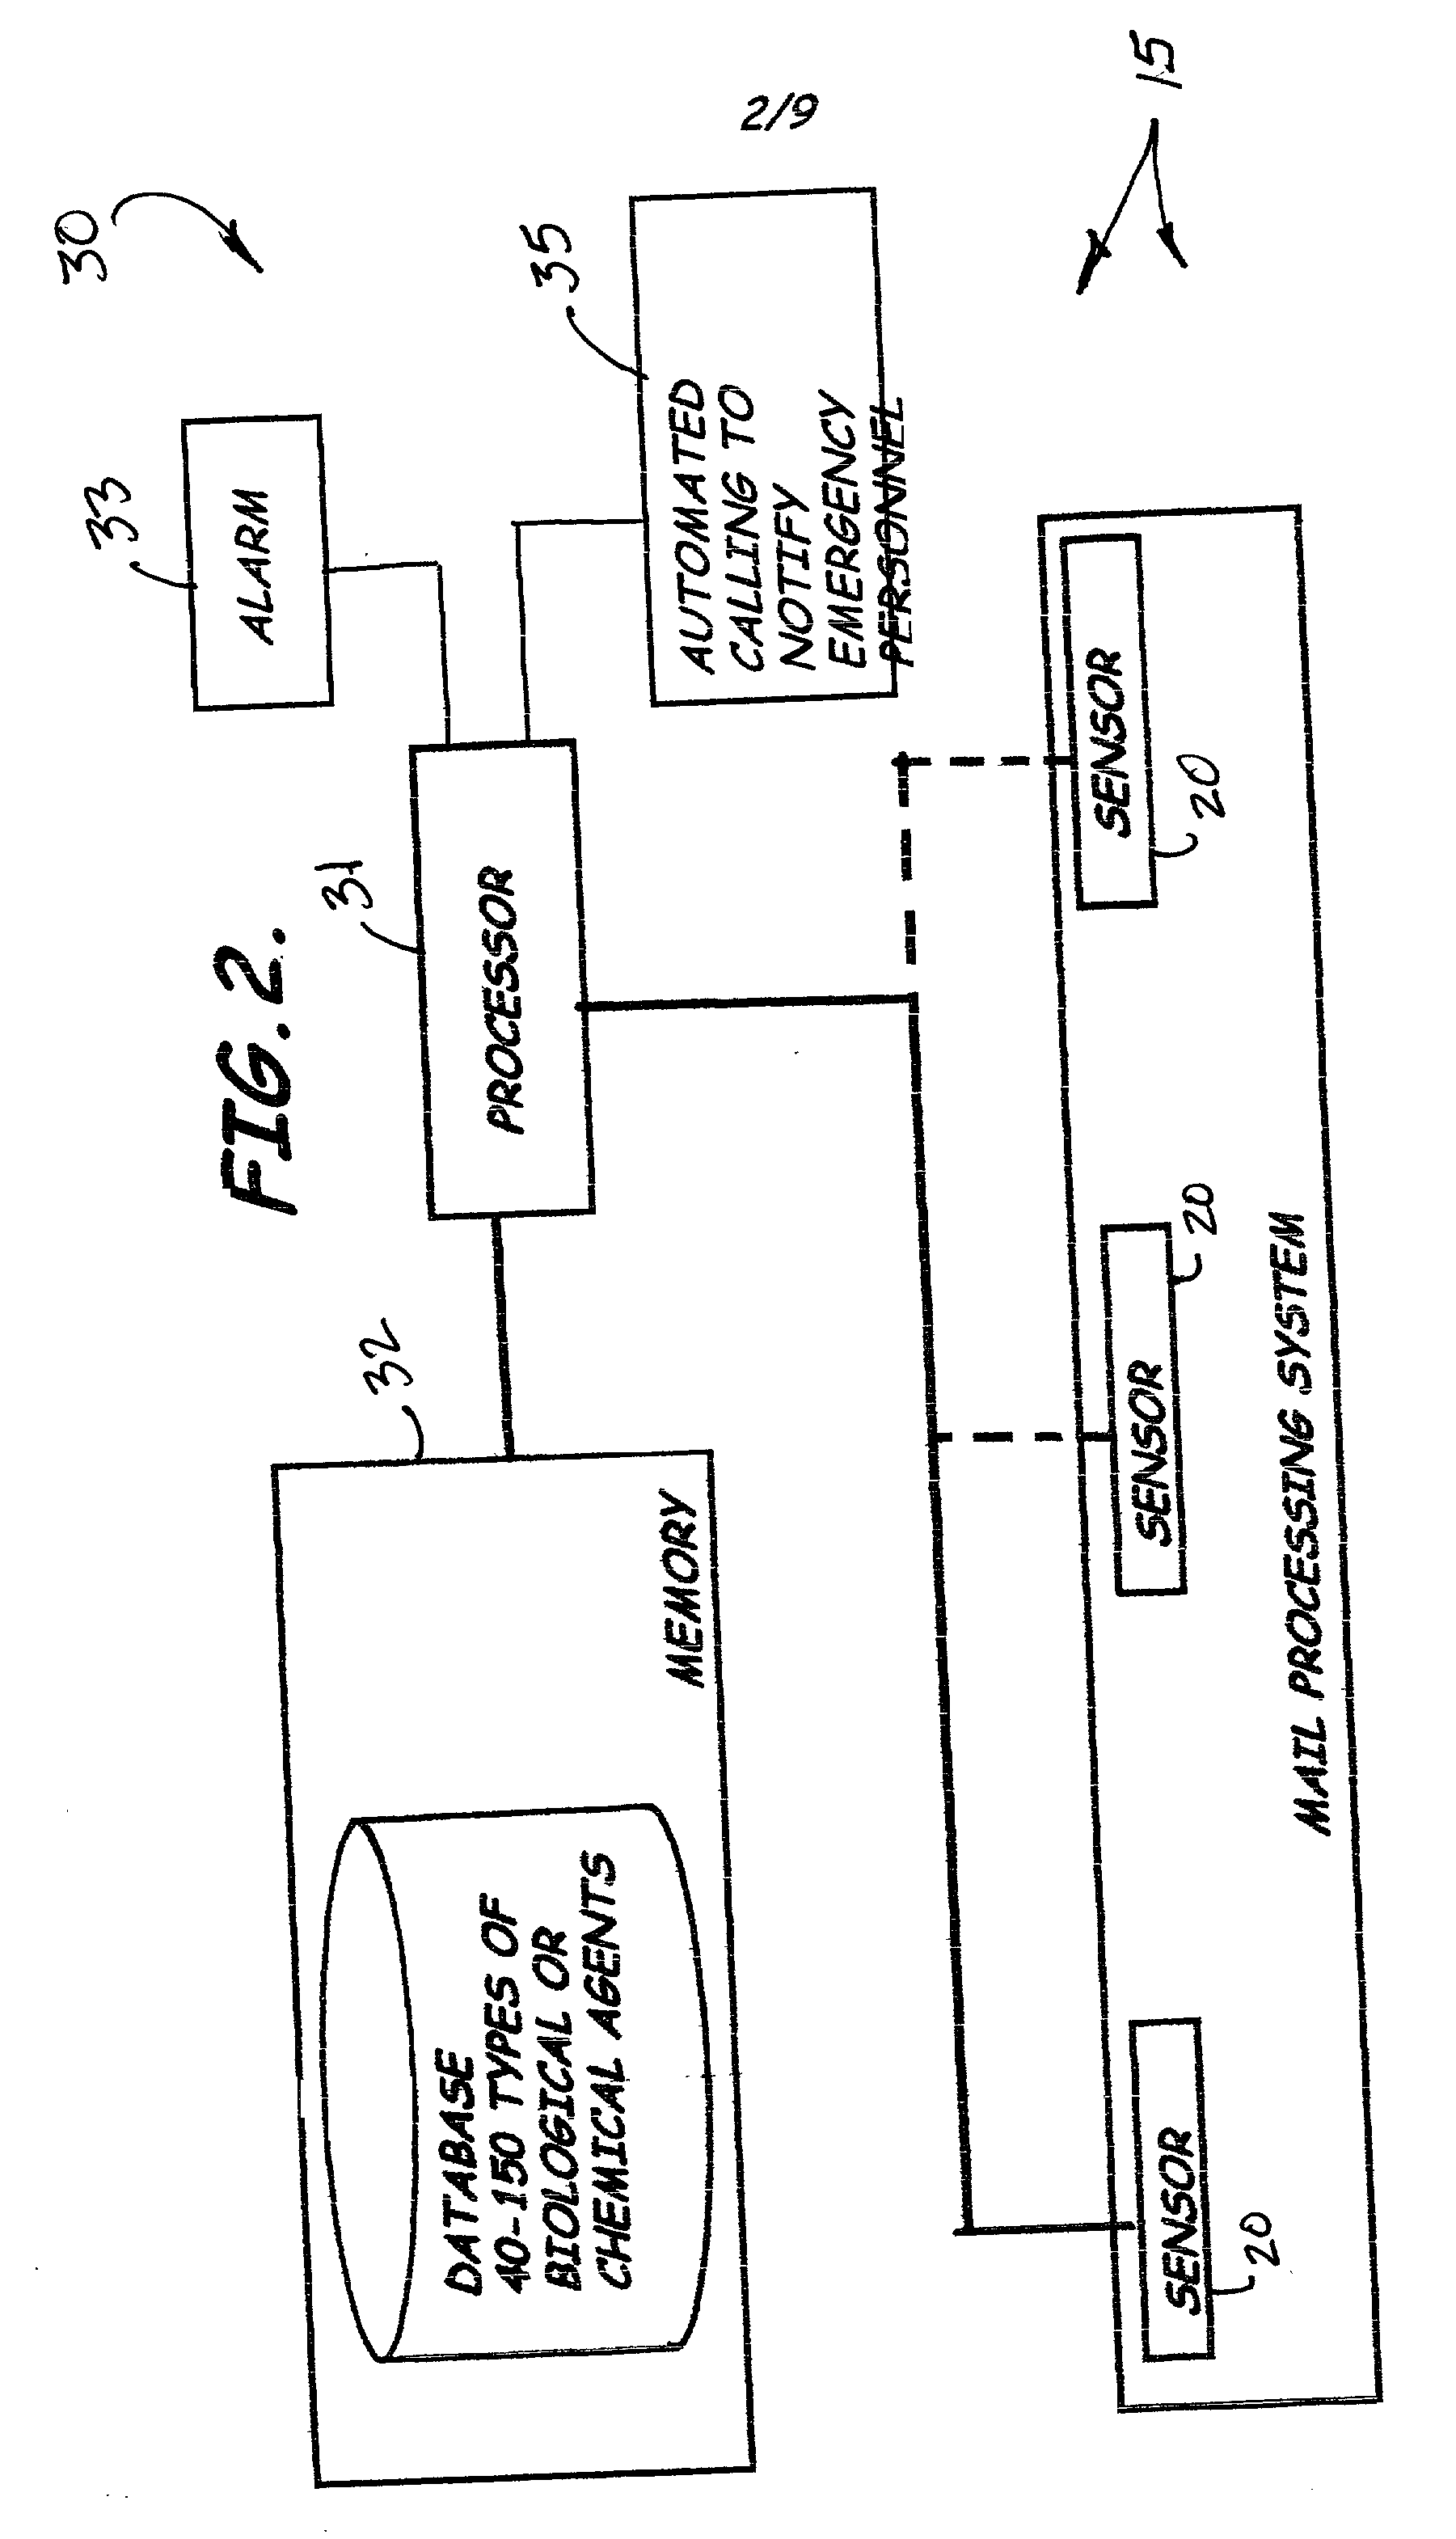 System and methods for detecting harmful agents within contents of mail